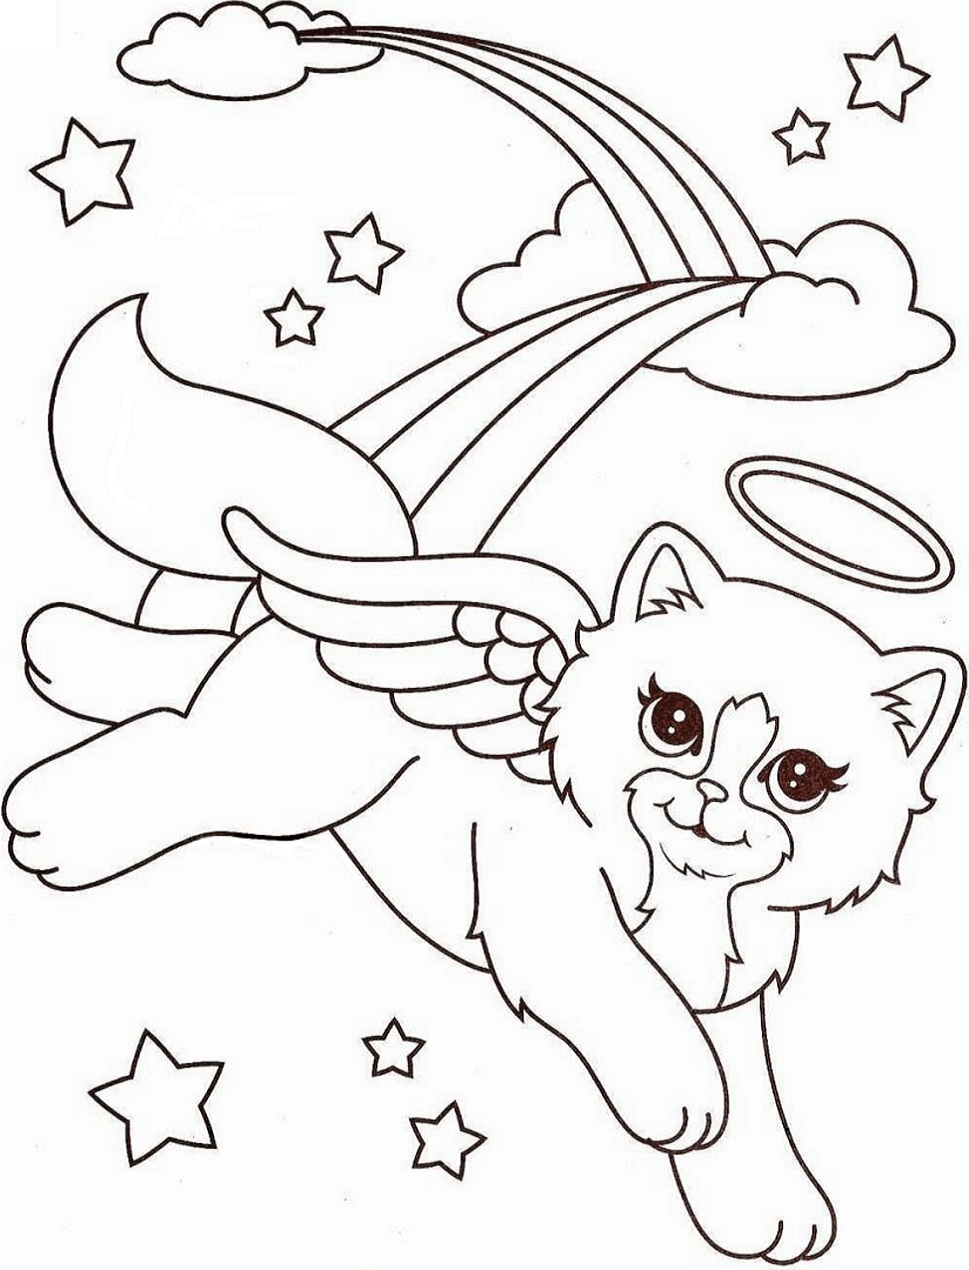 Angel Kitty From Lisa Frank Coloring Page   Free Printable ...